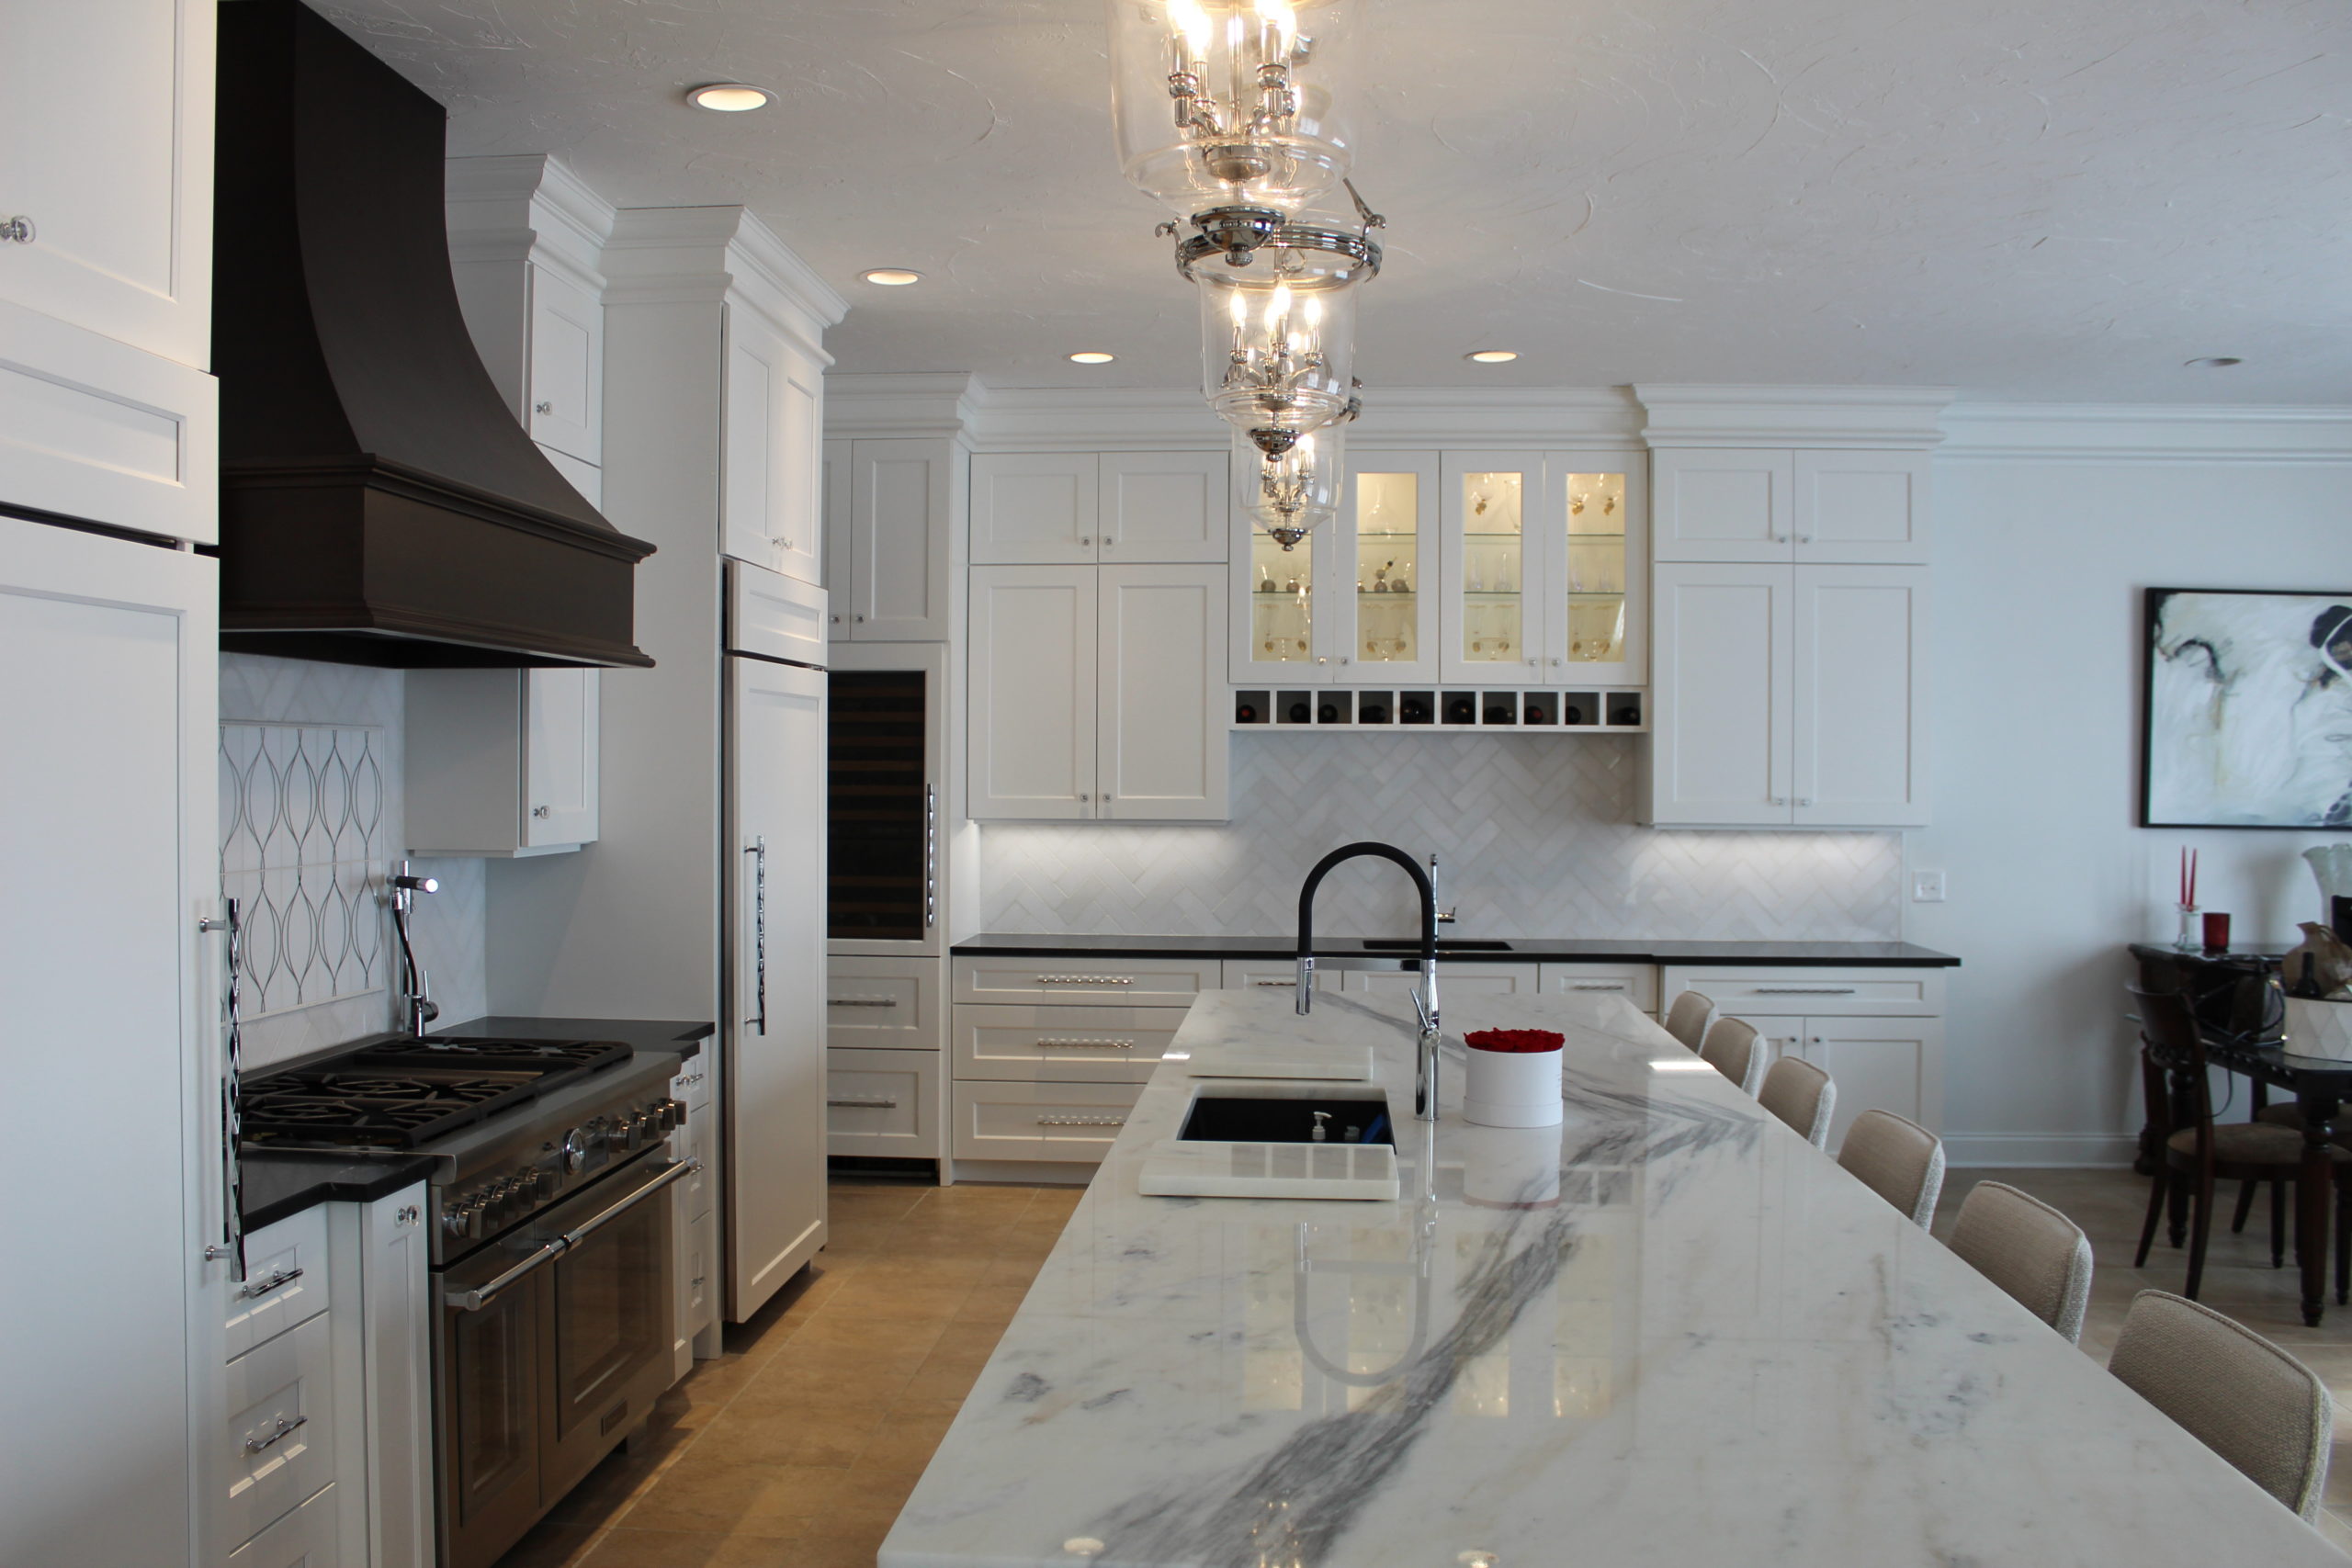 Things to consider for kitchen remodeling